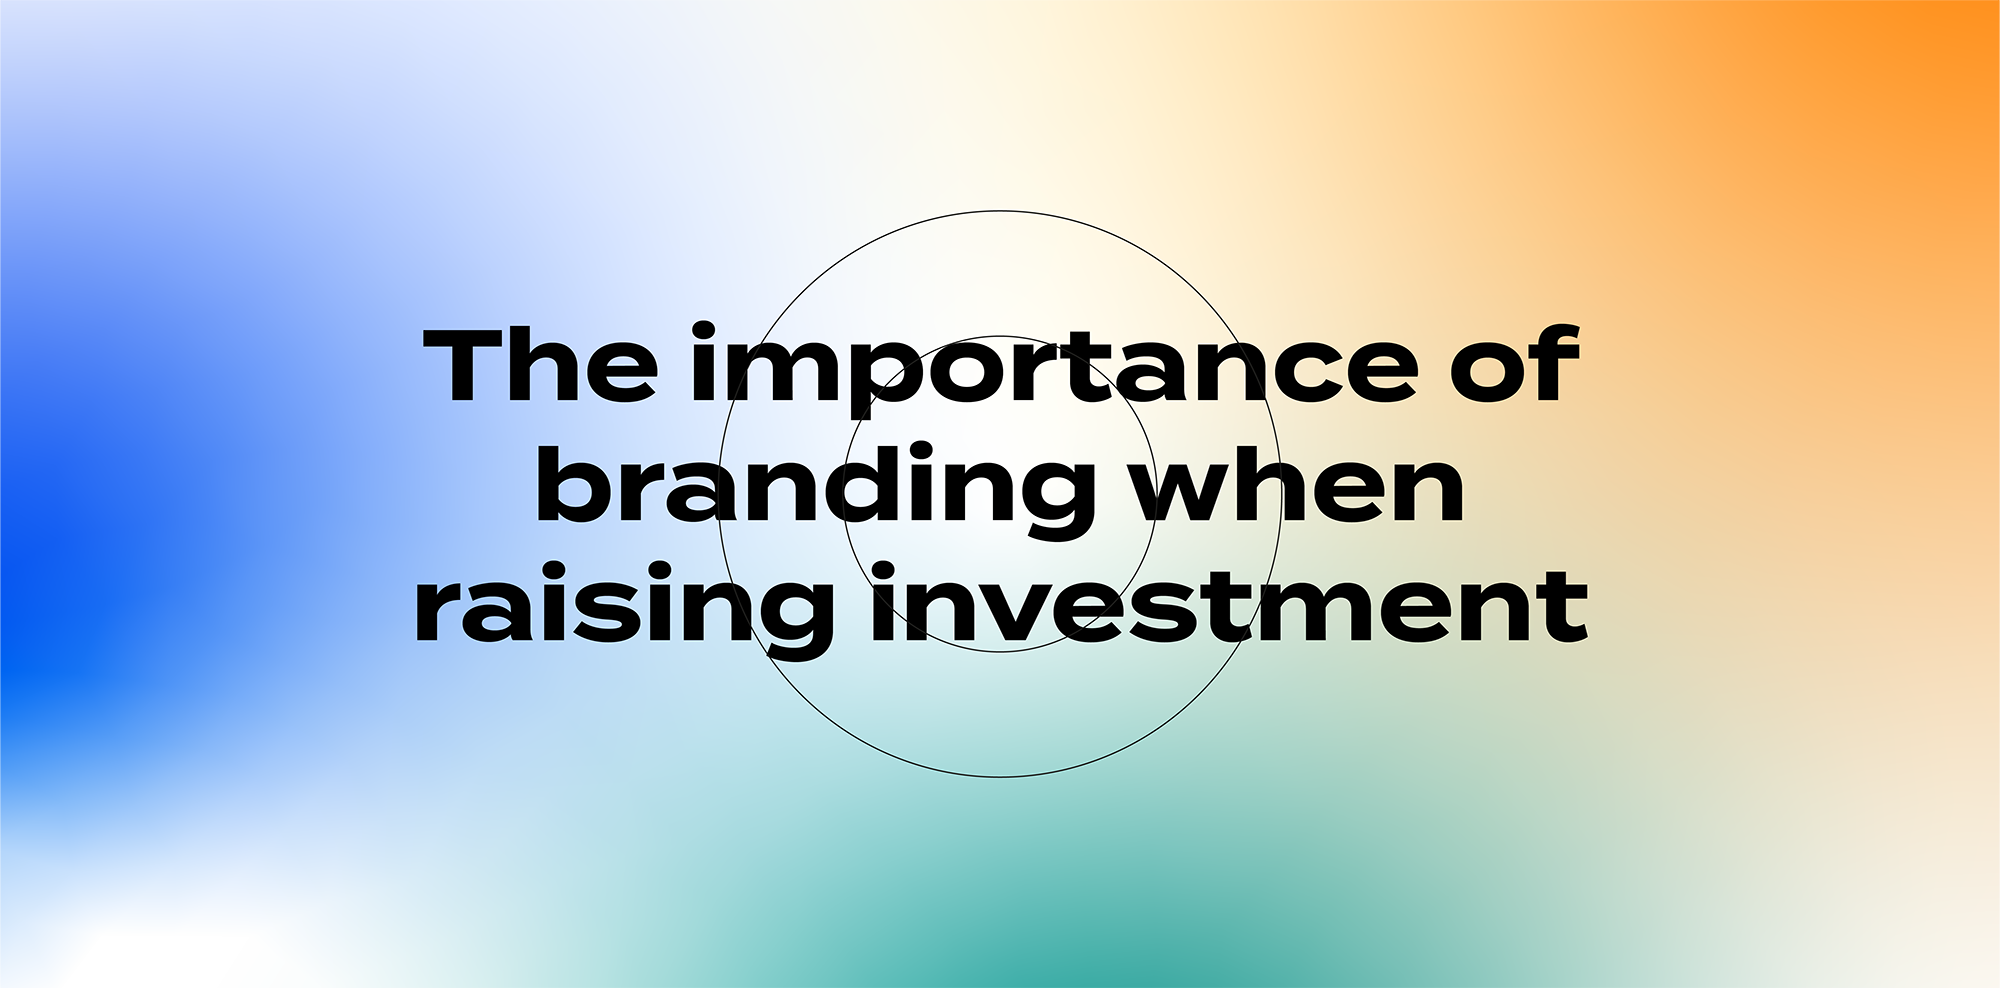 The importance of branding when raising investment